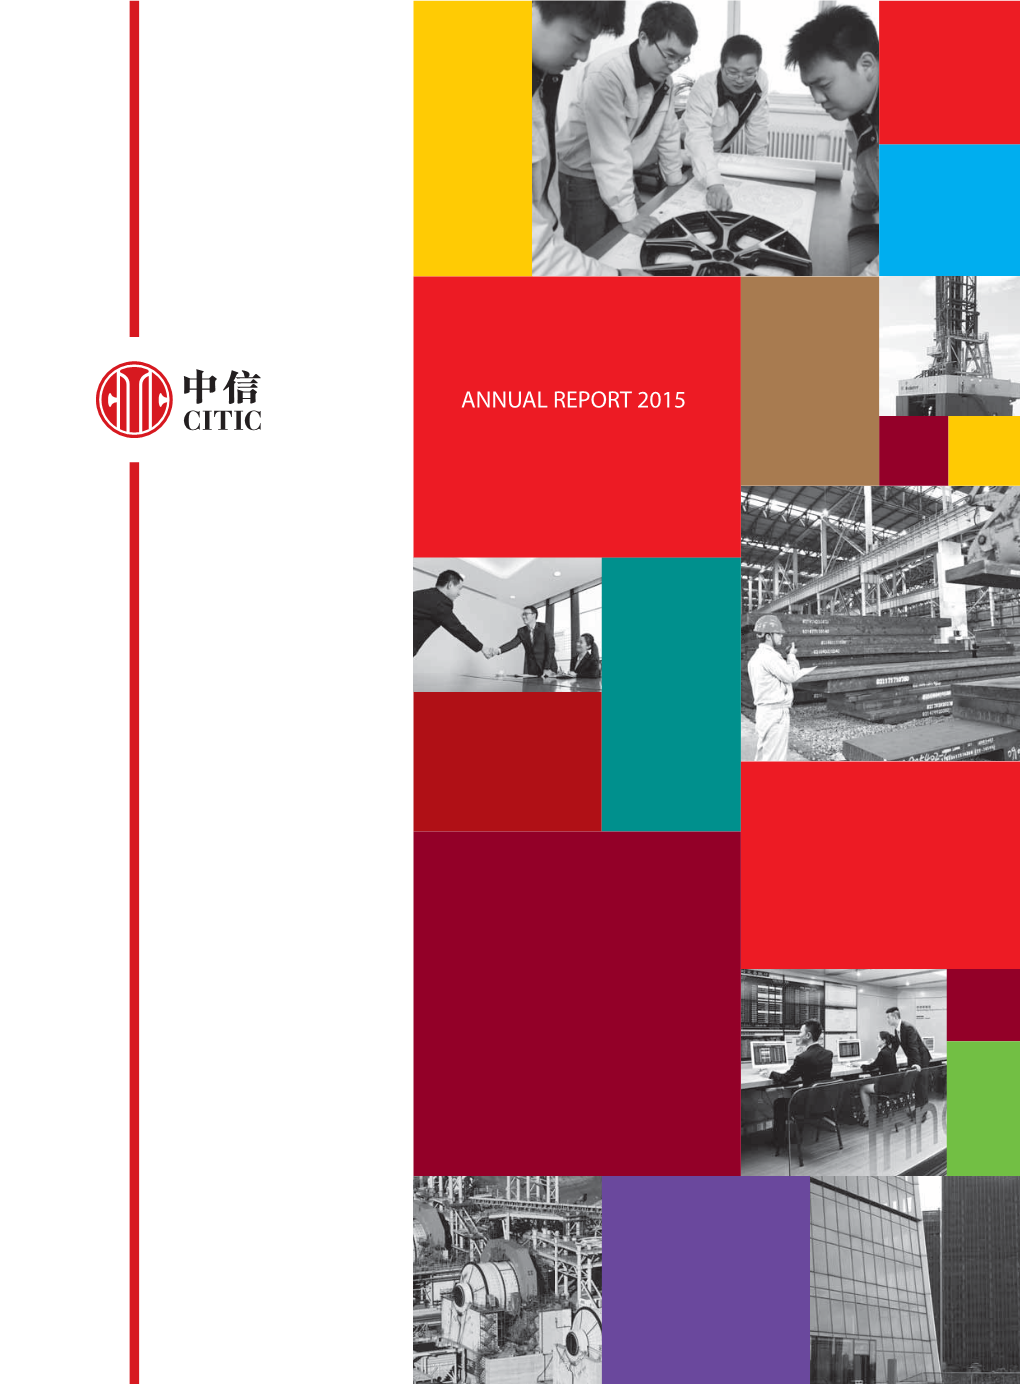 ANNUAL REPORT 2015 Our Company